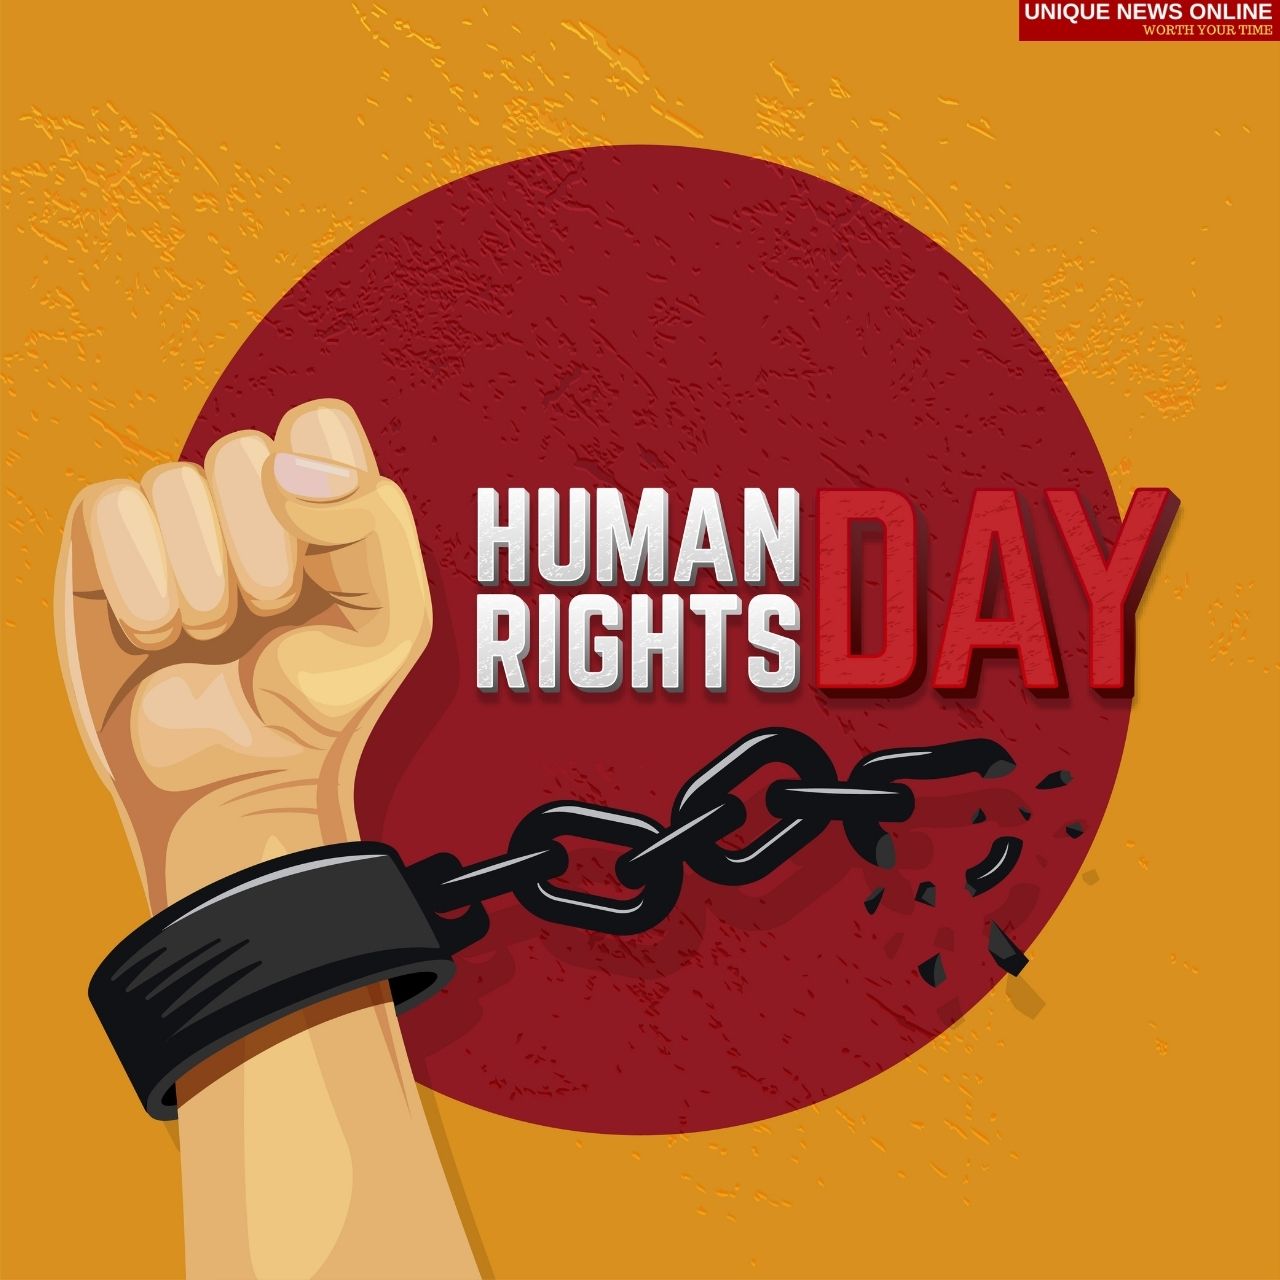 Human Rights Day 2021 Theme, History, Significance, Importance, Activities Ideas, and everything you need to know